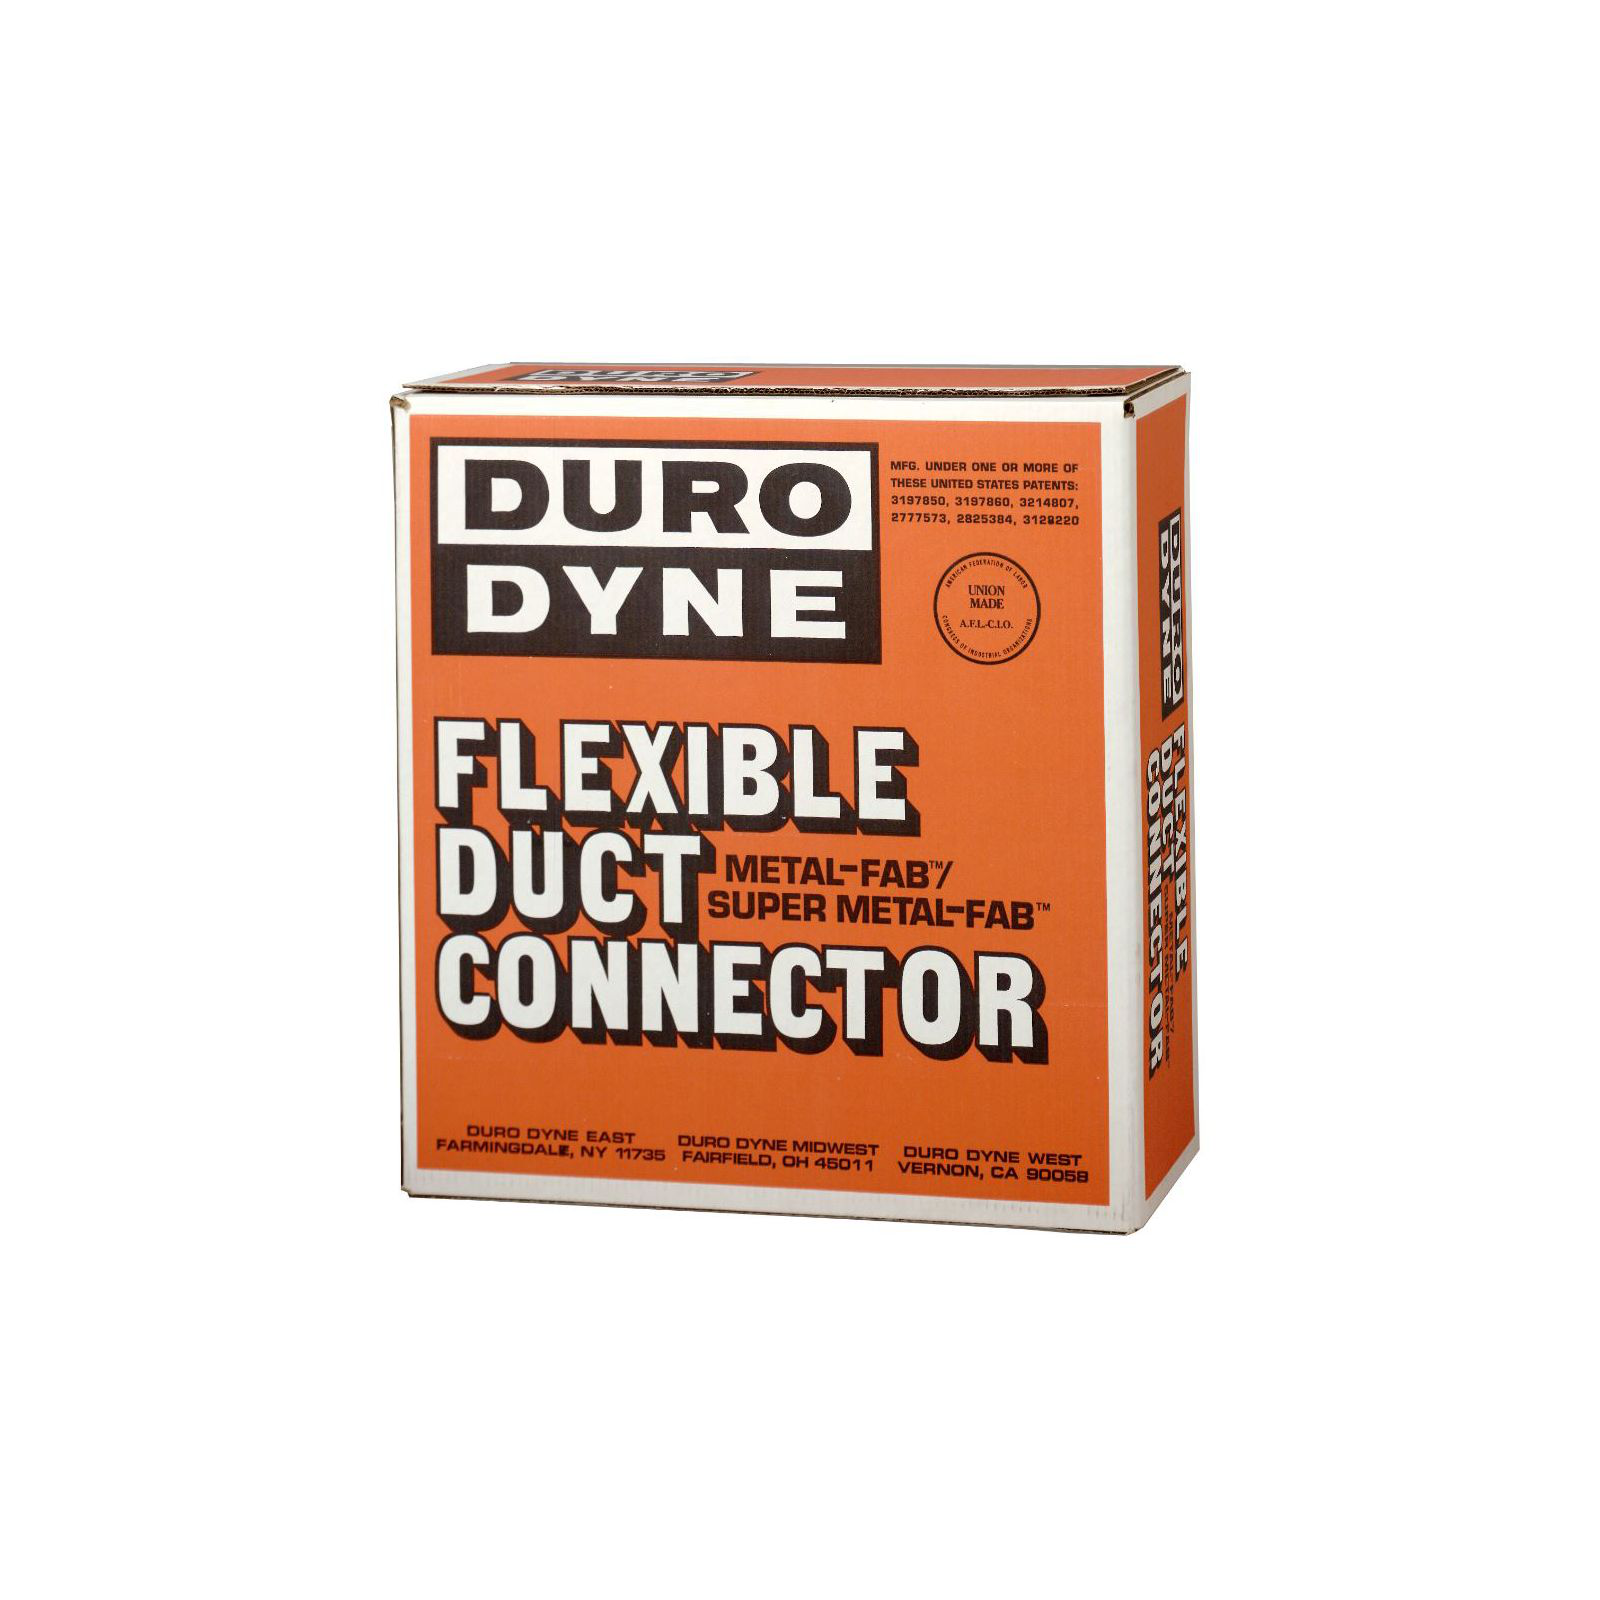 Flexible Duct Connector 10013